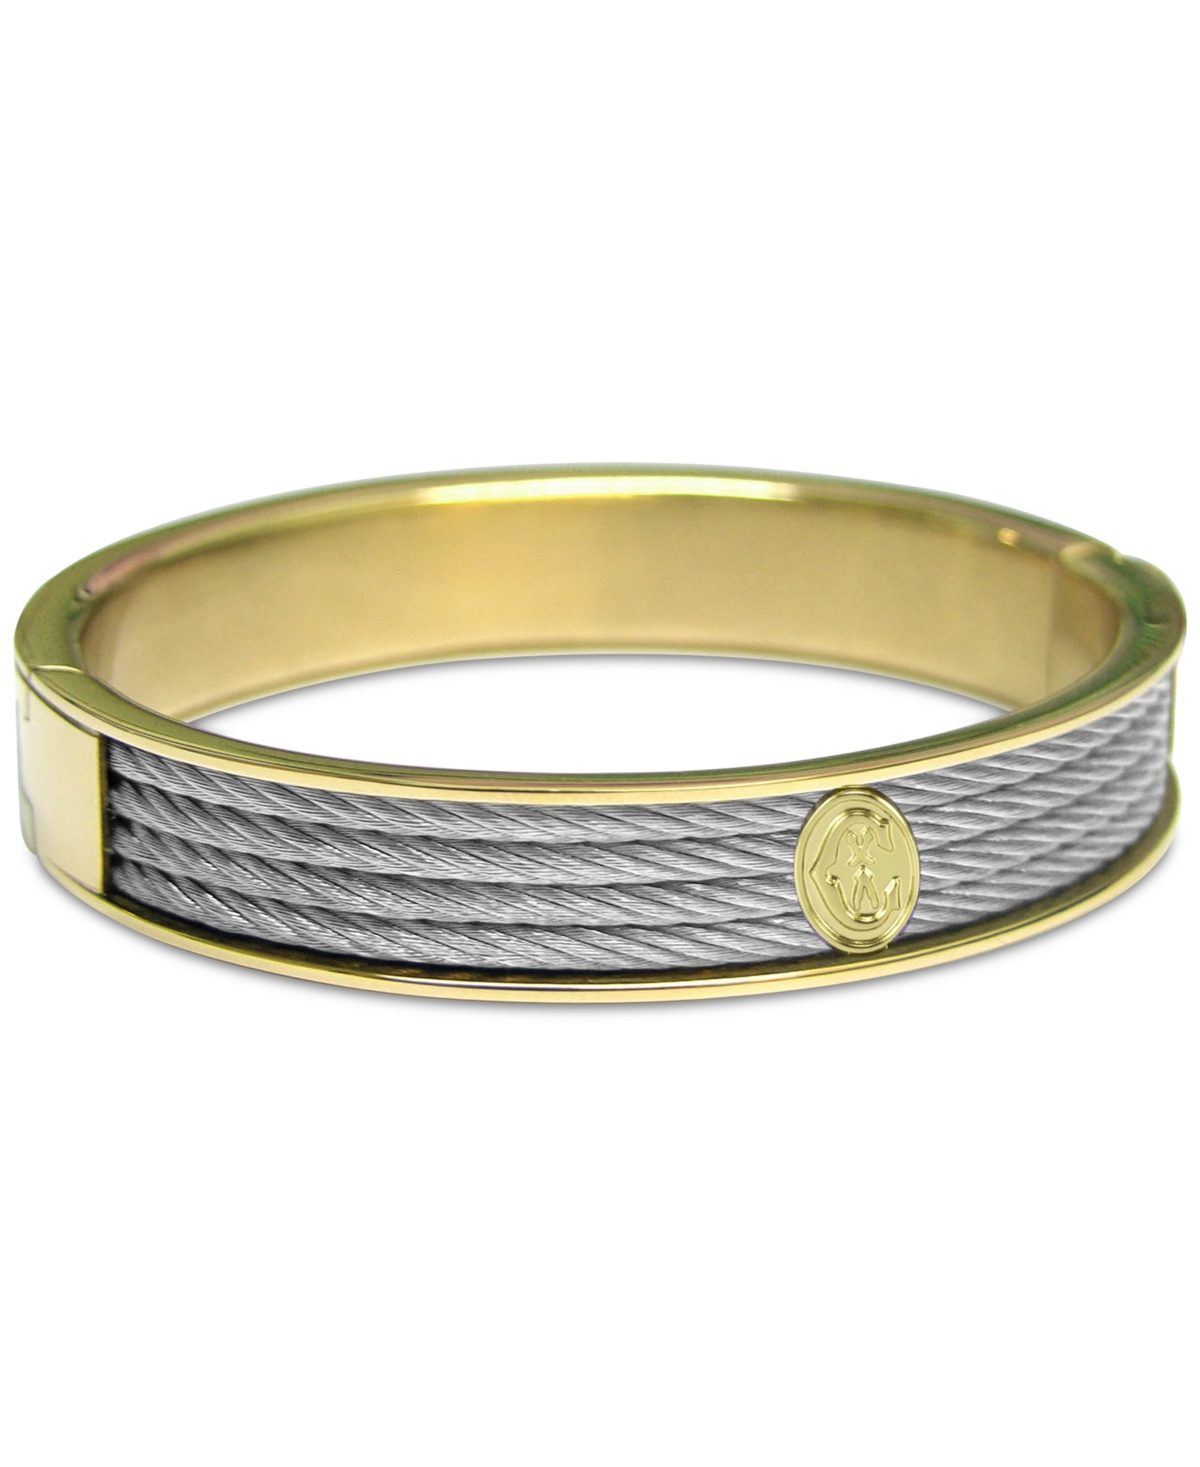 Cable Two-Tone Bangle Bracelet in Stainless Steel & Gold-Tone Pvd Stainless Steel